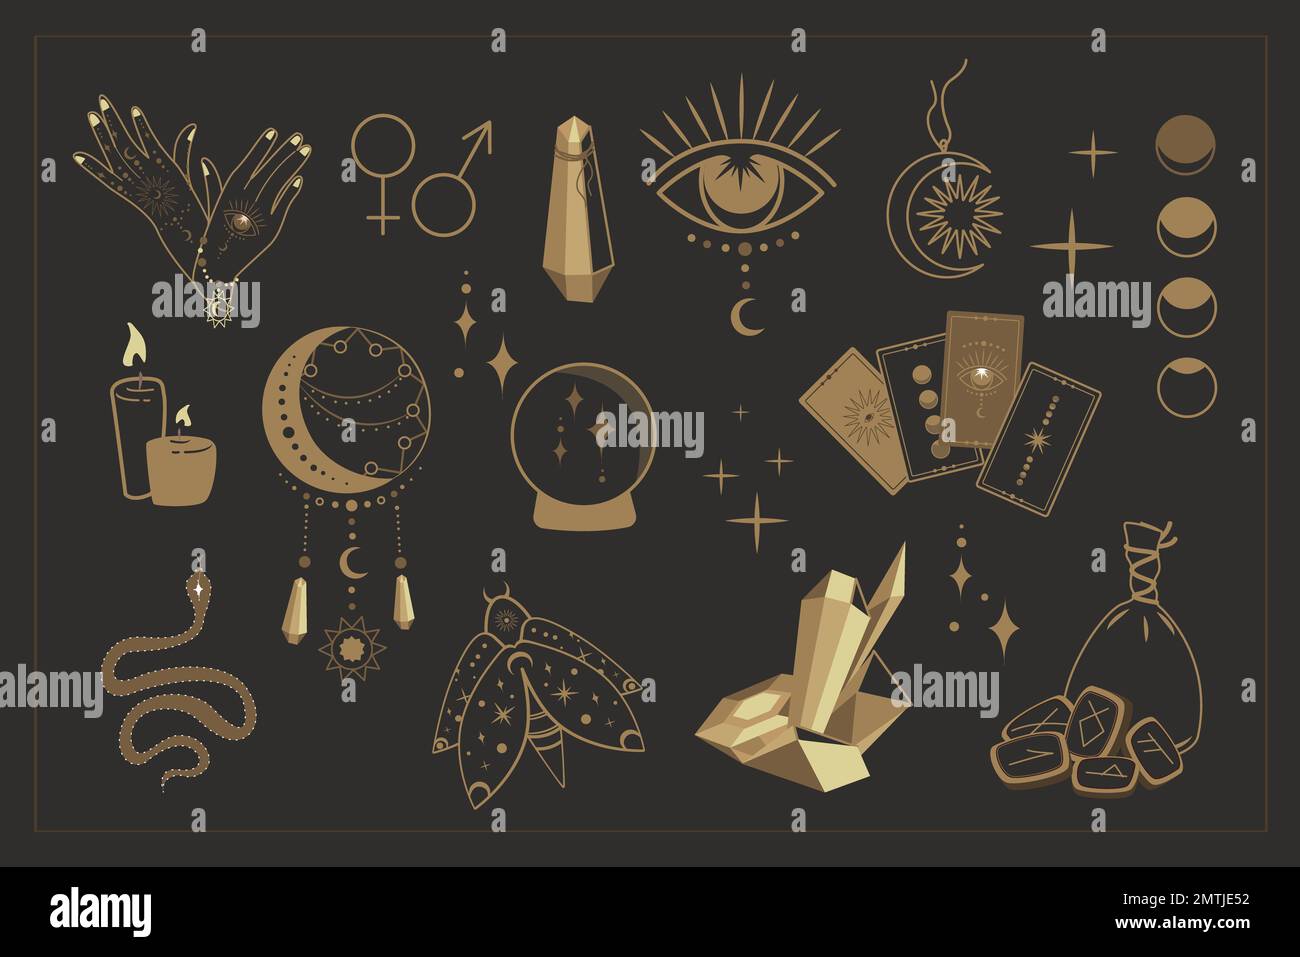 Magic symbols collection set.Esoteric,Mysterious boho mystical elements,magic witchcraft crystals,eye,moon,tarot cards,runes vector illustration icons Stock Photo